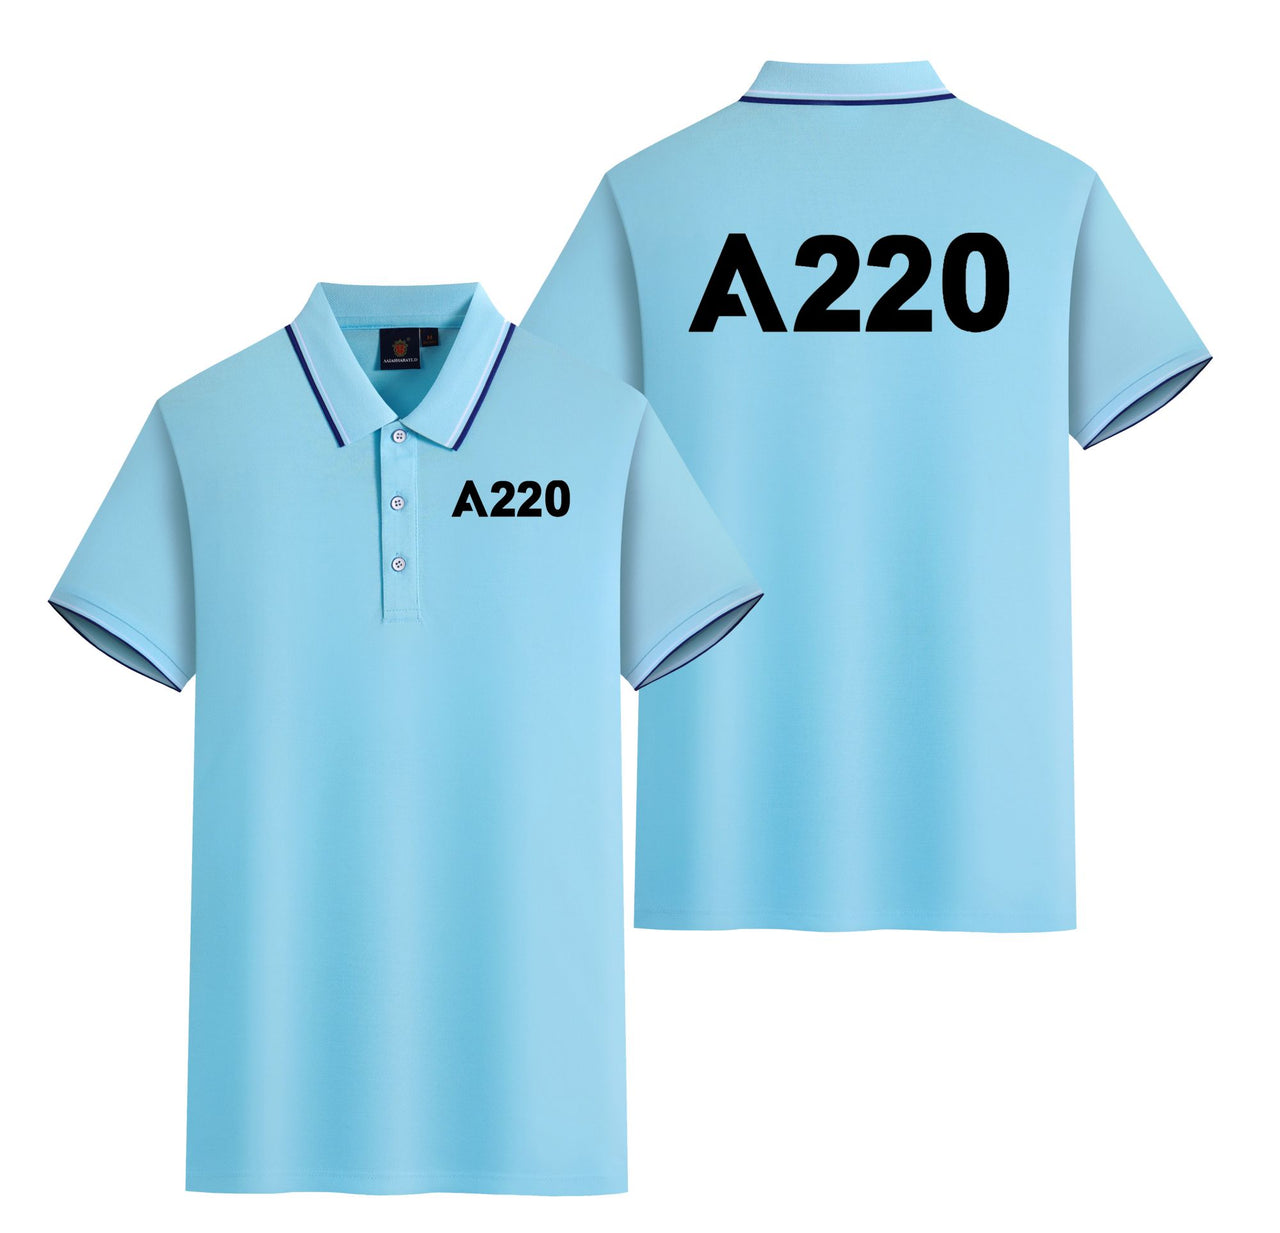 A220 Flat Text Designed Stylish Polo T-Shirts (Double-Side)